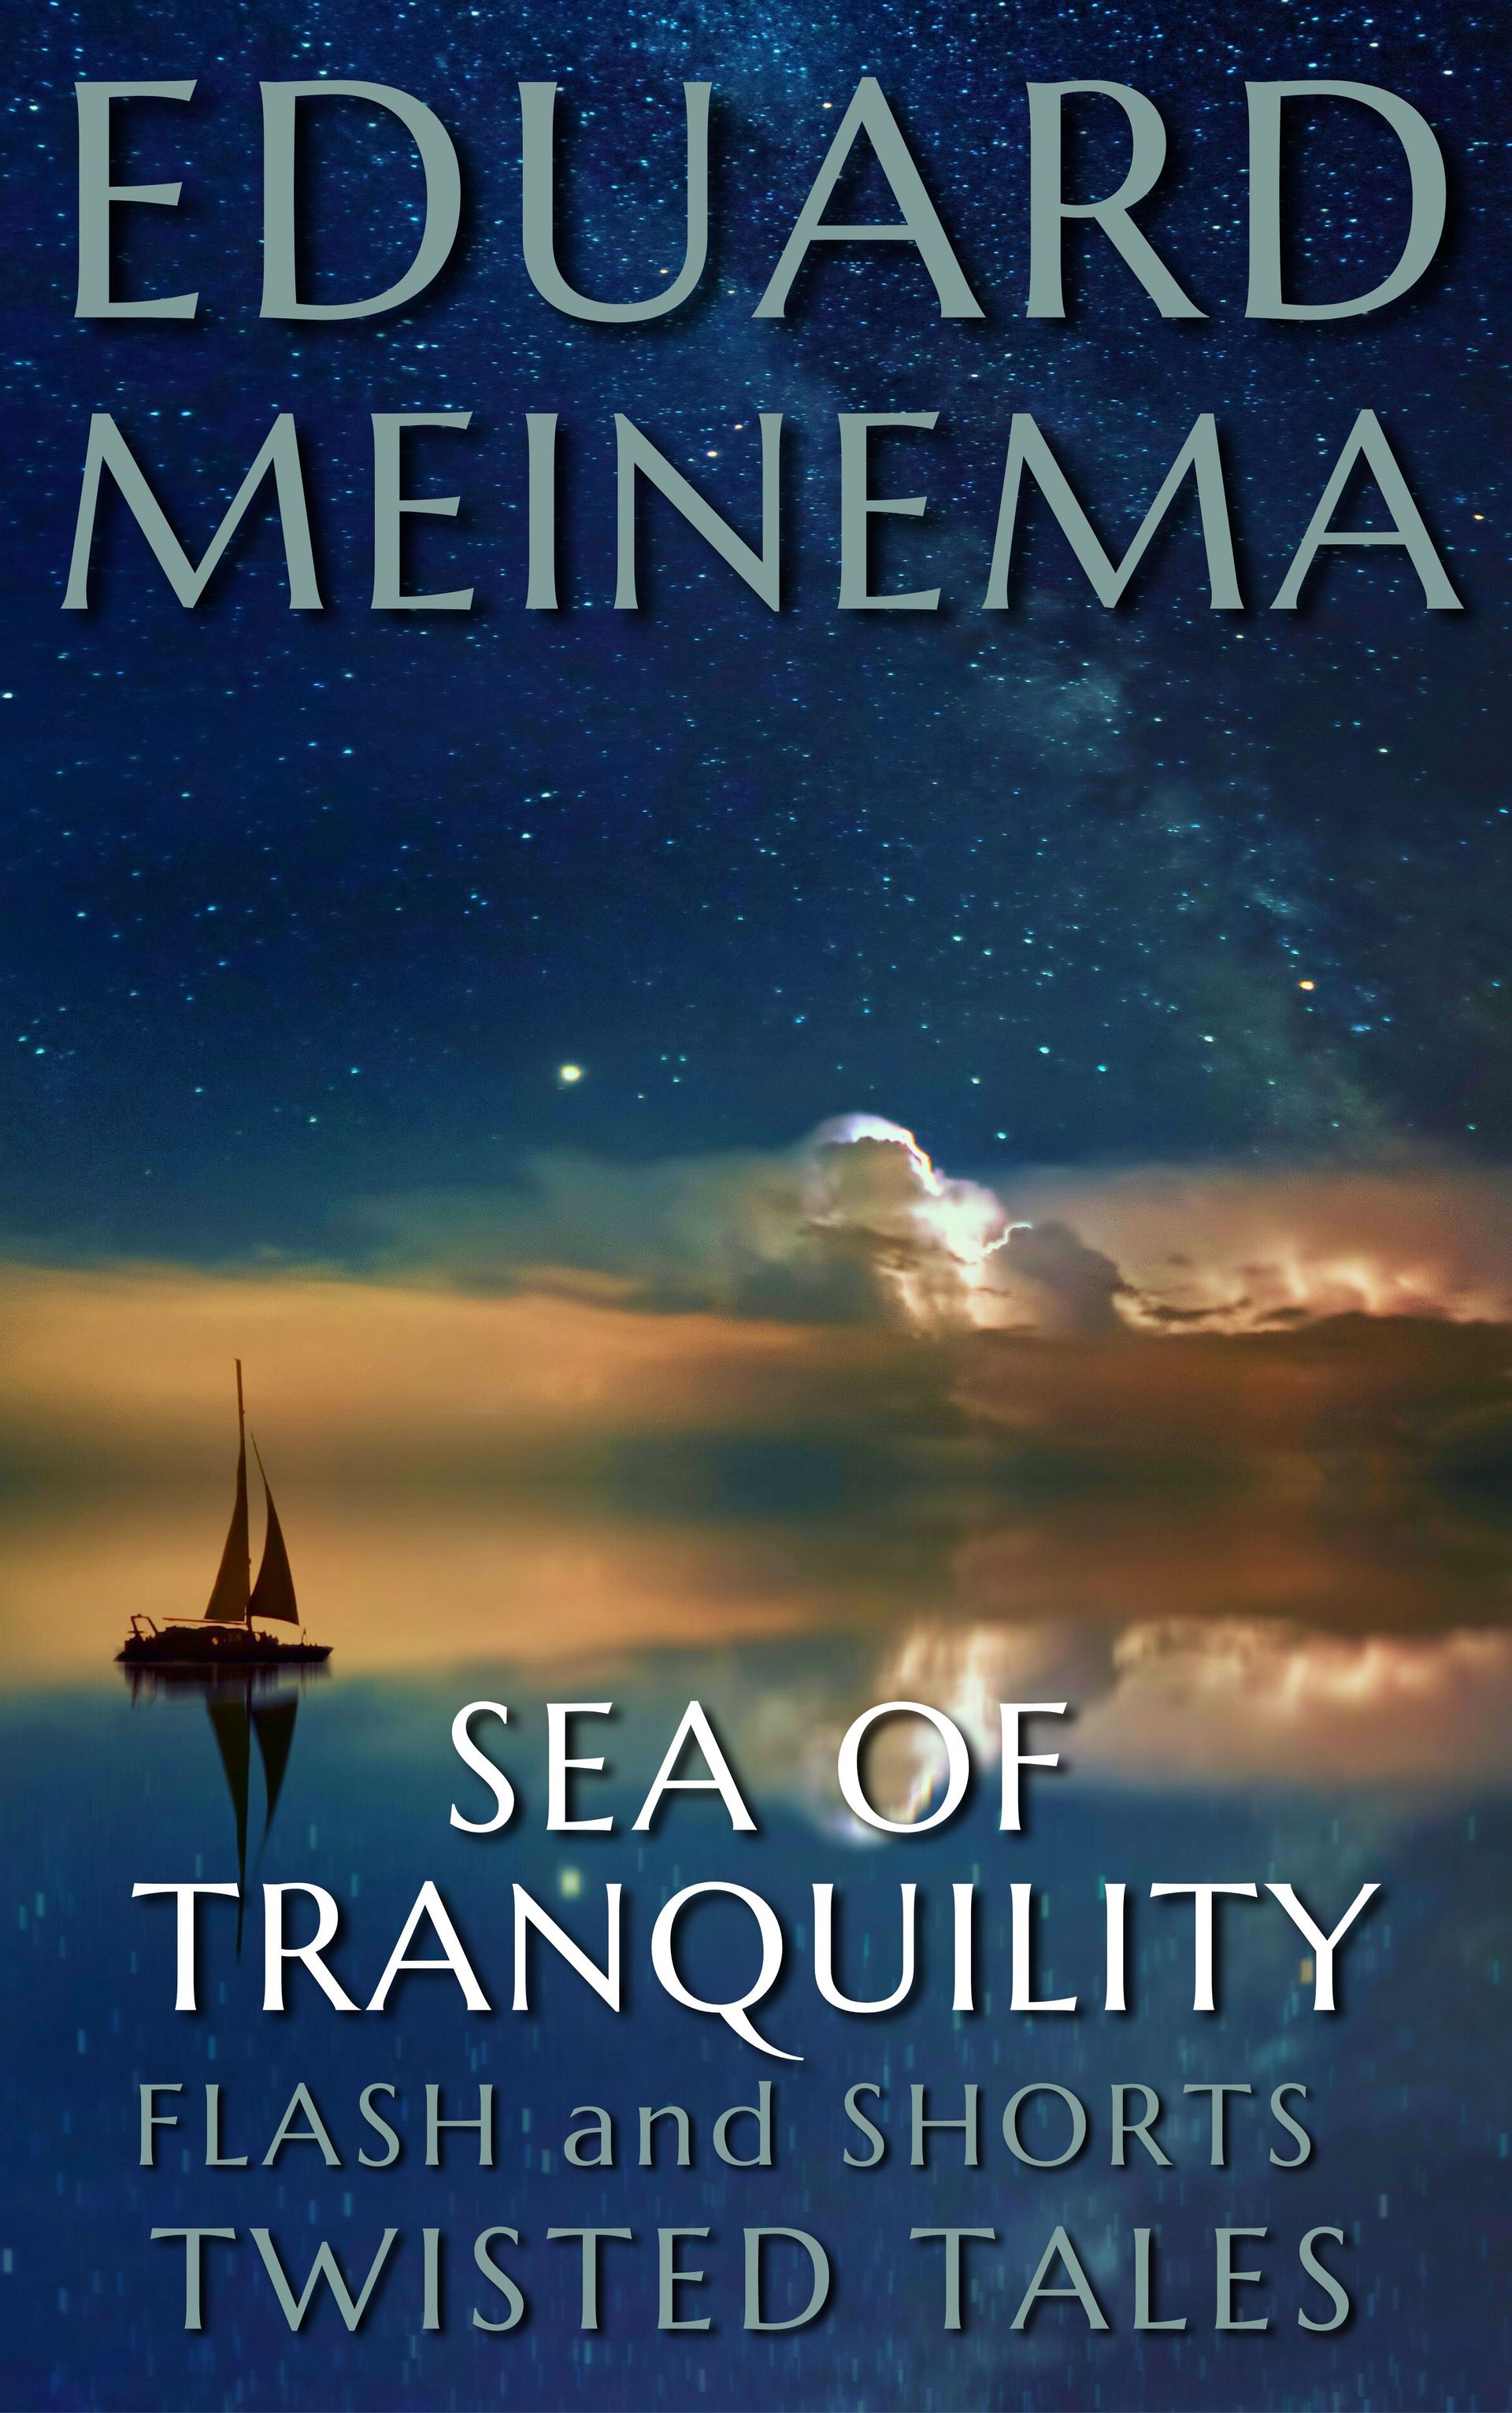 Sea of Tranquility,  a Flash Fiction  story by Eduard Meinema.